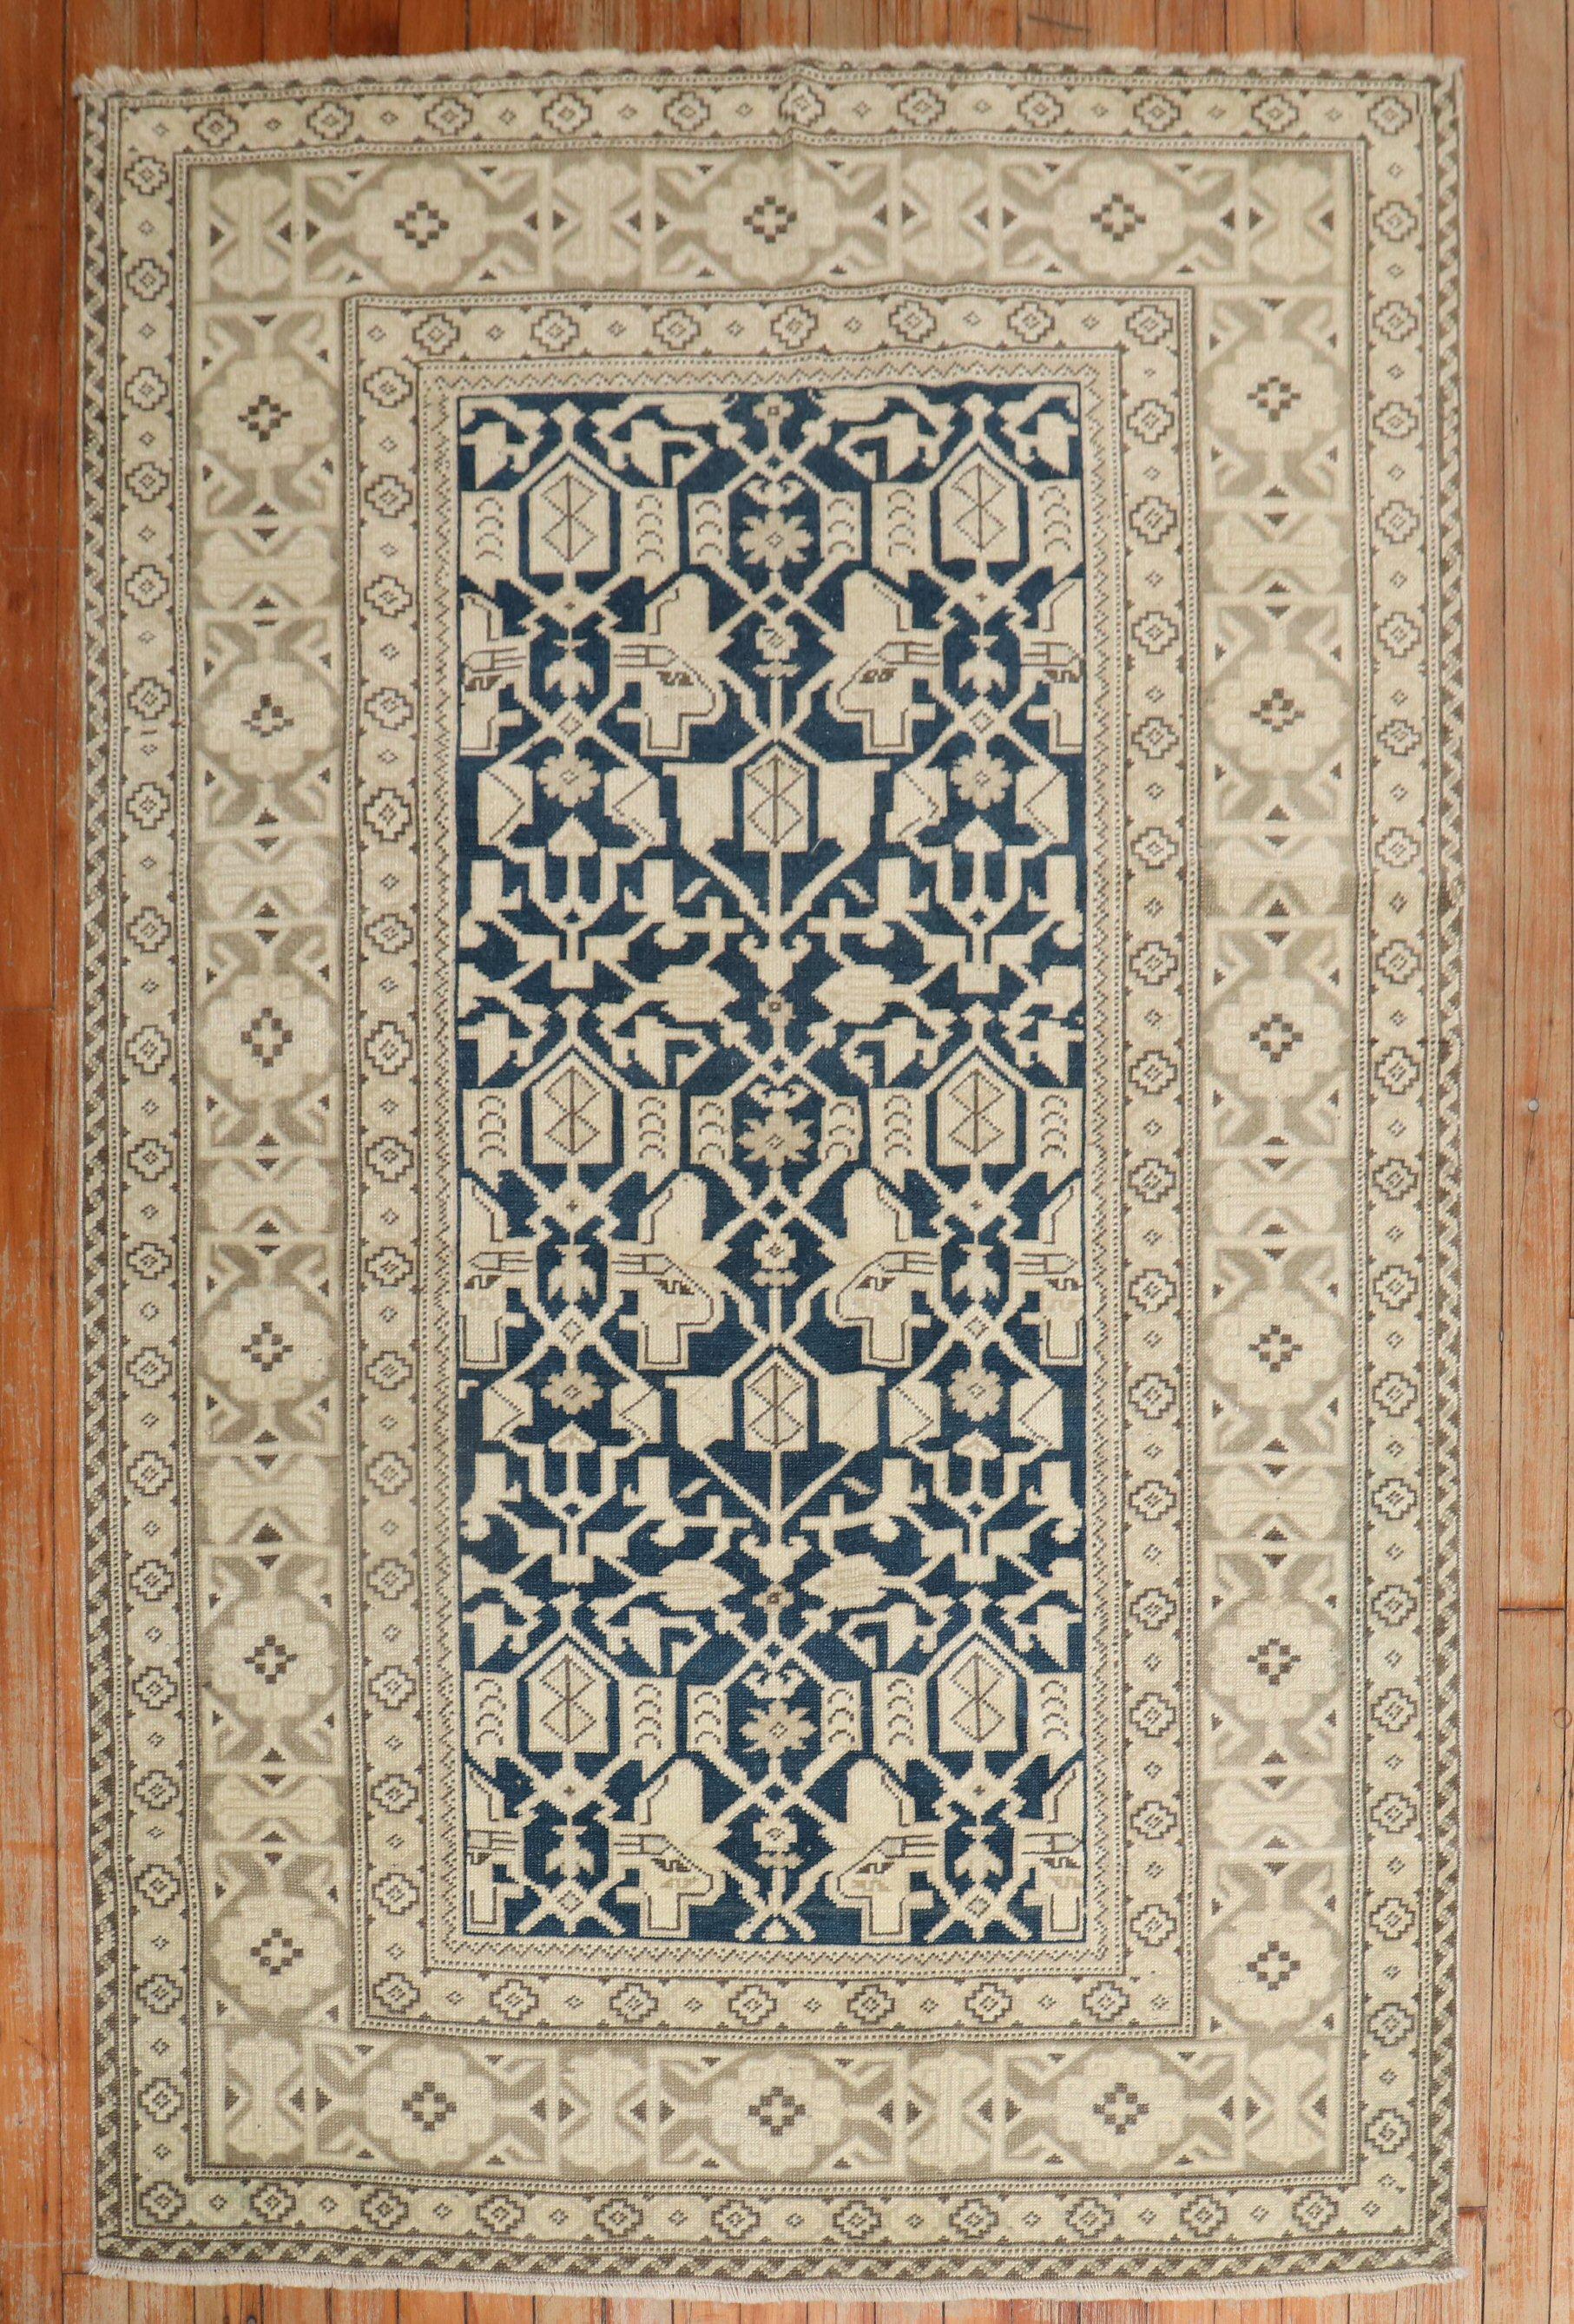 A blue and khaki vintage Caucasian perdedil rug from the2nd quarter of the 20th century

Measures: 3'10